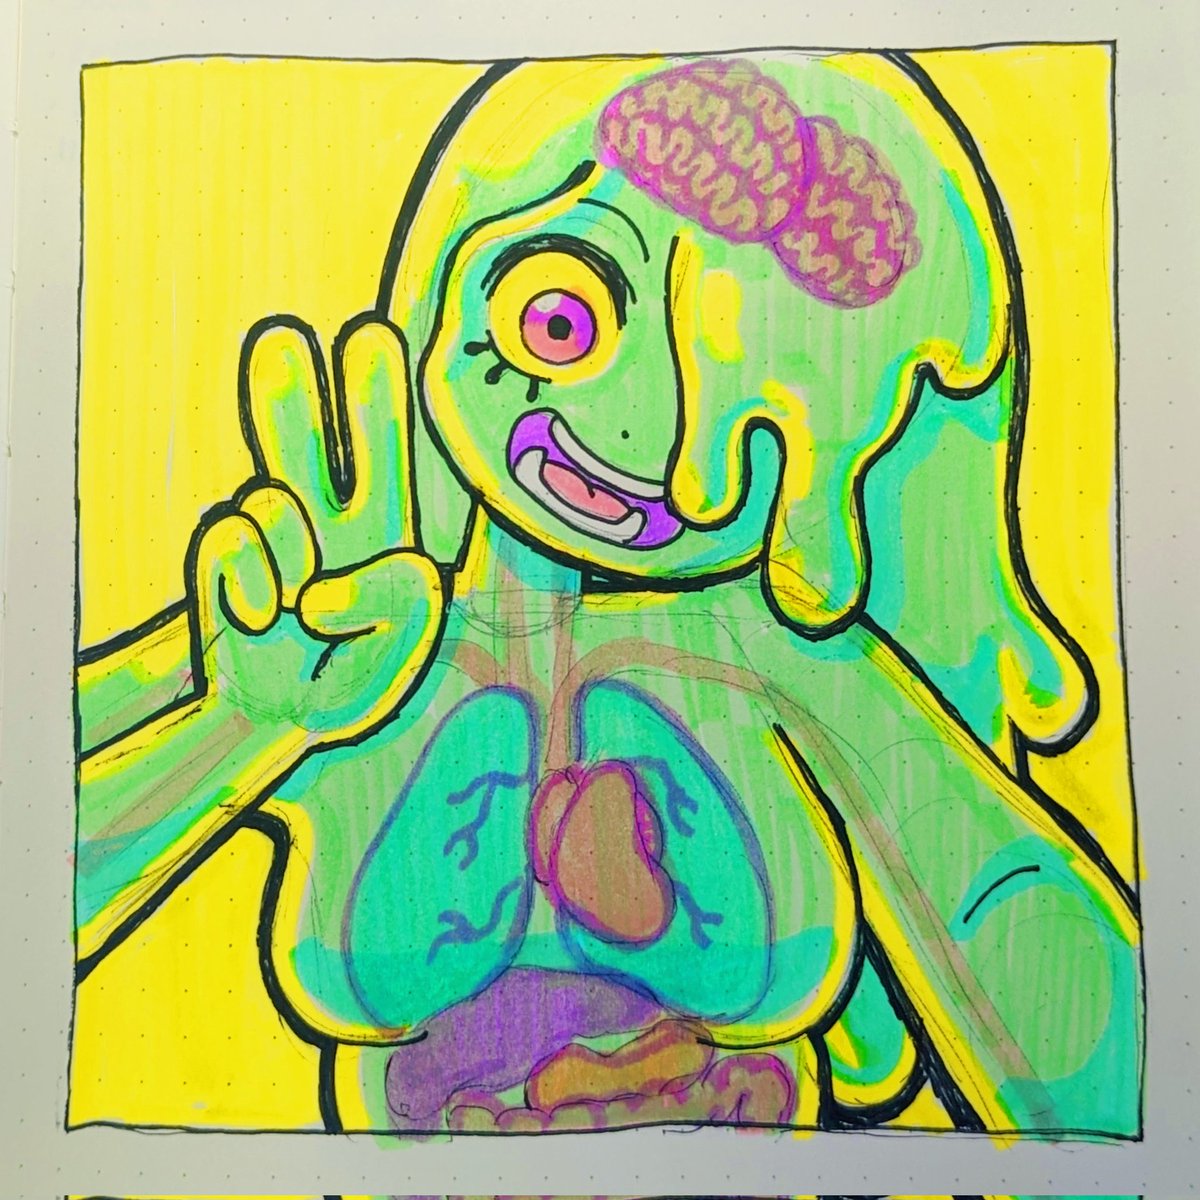 quick lunch time drawing....slime girl...highlighter and pen...